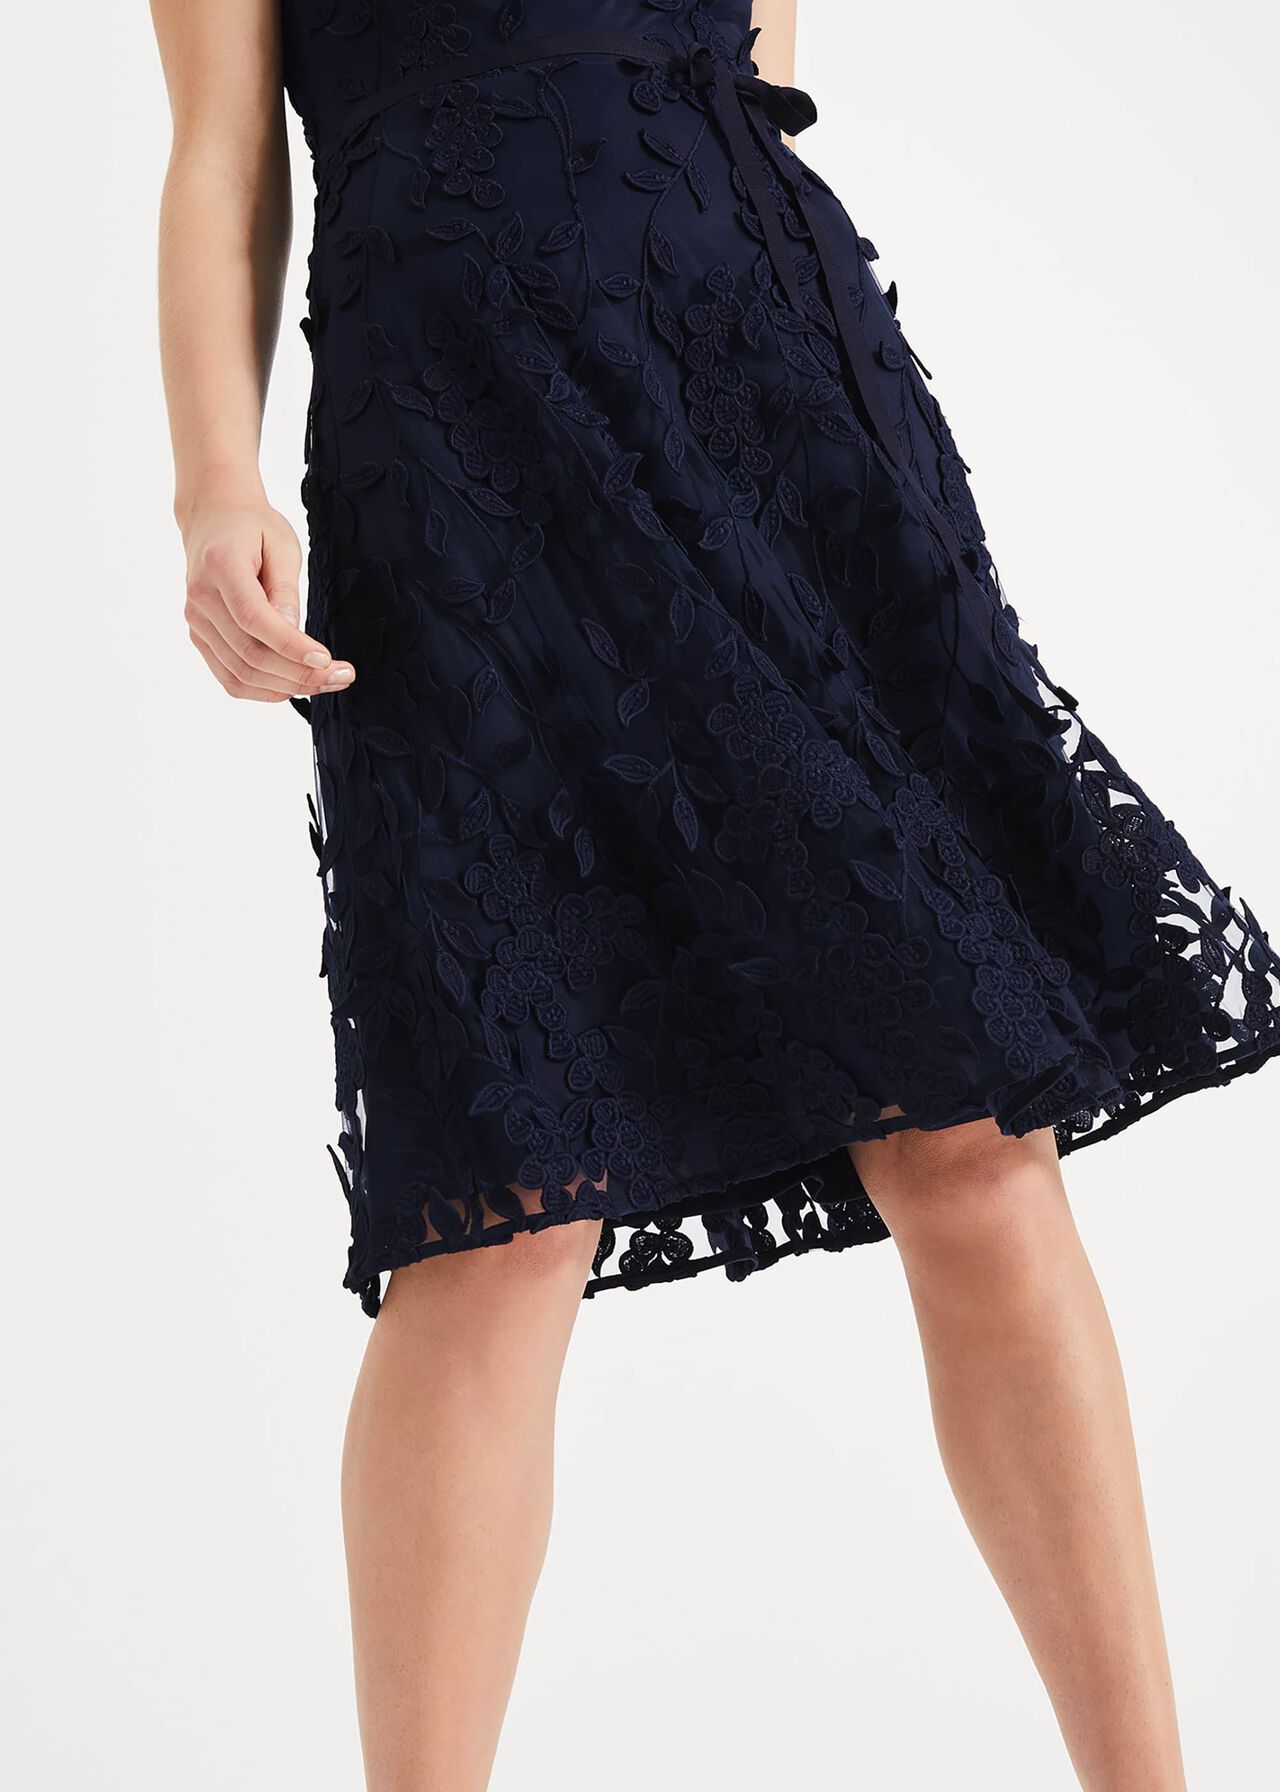 Kenzie Embroidered Dress